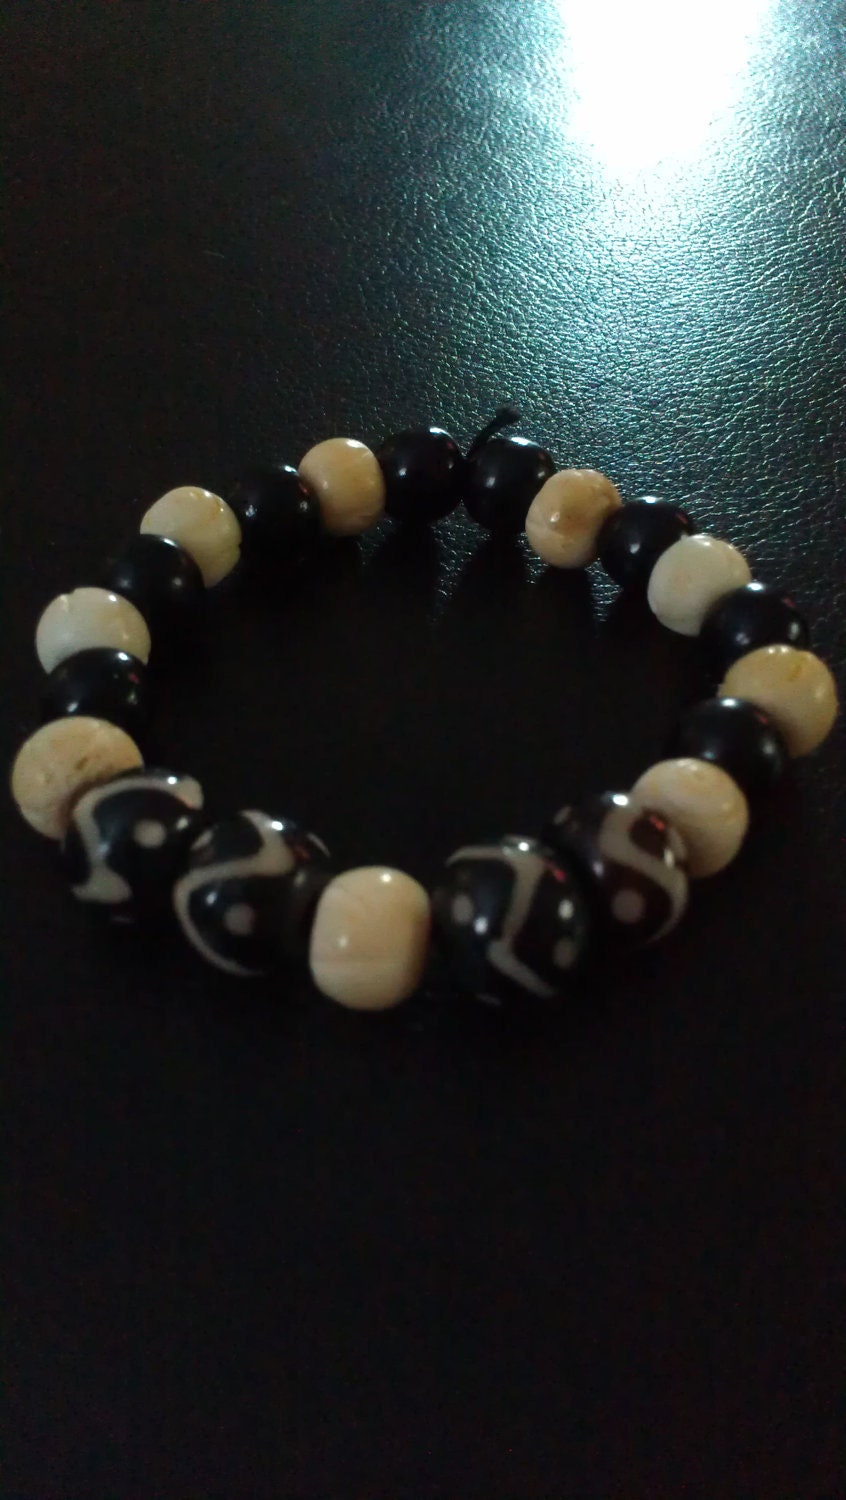 Unisex Tribal Black and Ivory Beaded Bracelet with Wooden, Bone, and Ceramic Beads and Stretch Elastic Cord